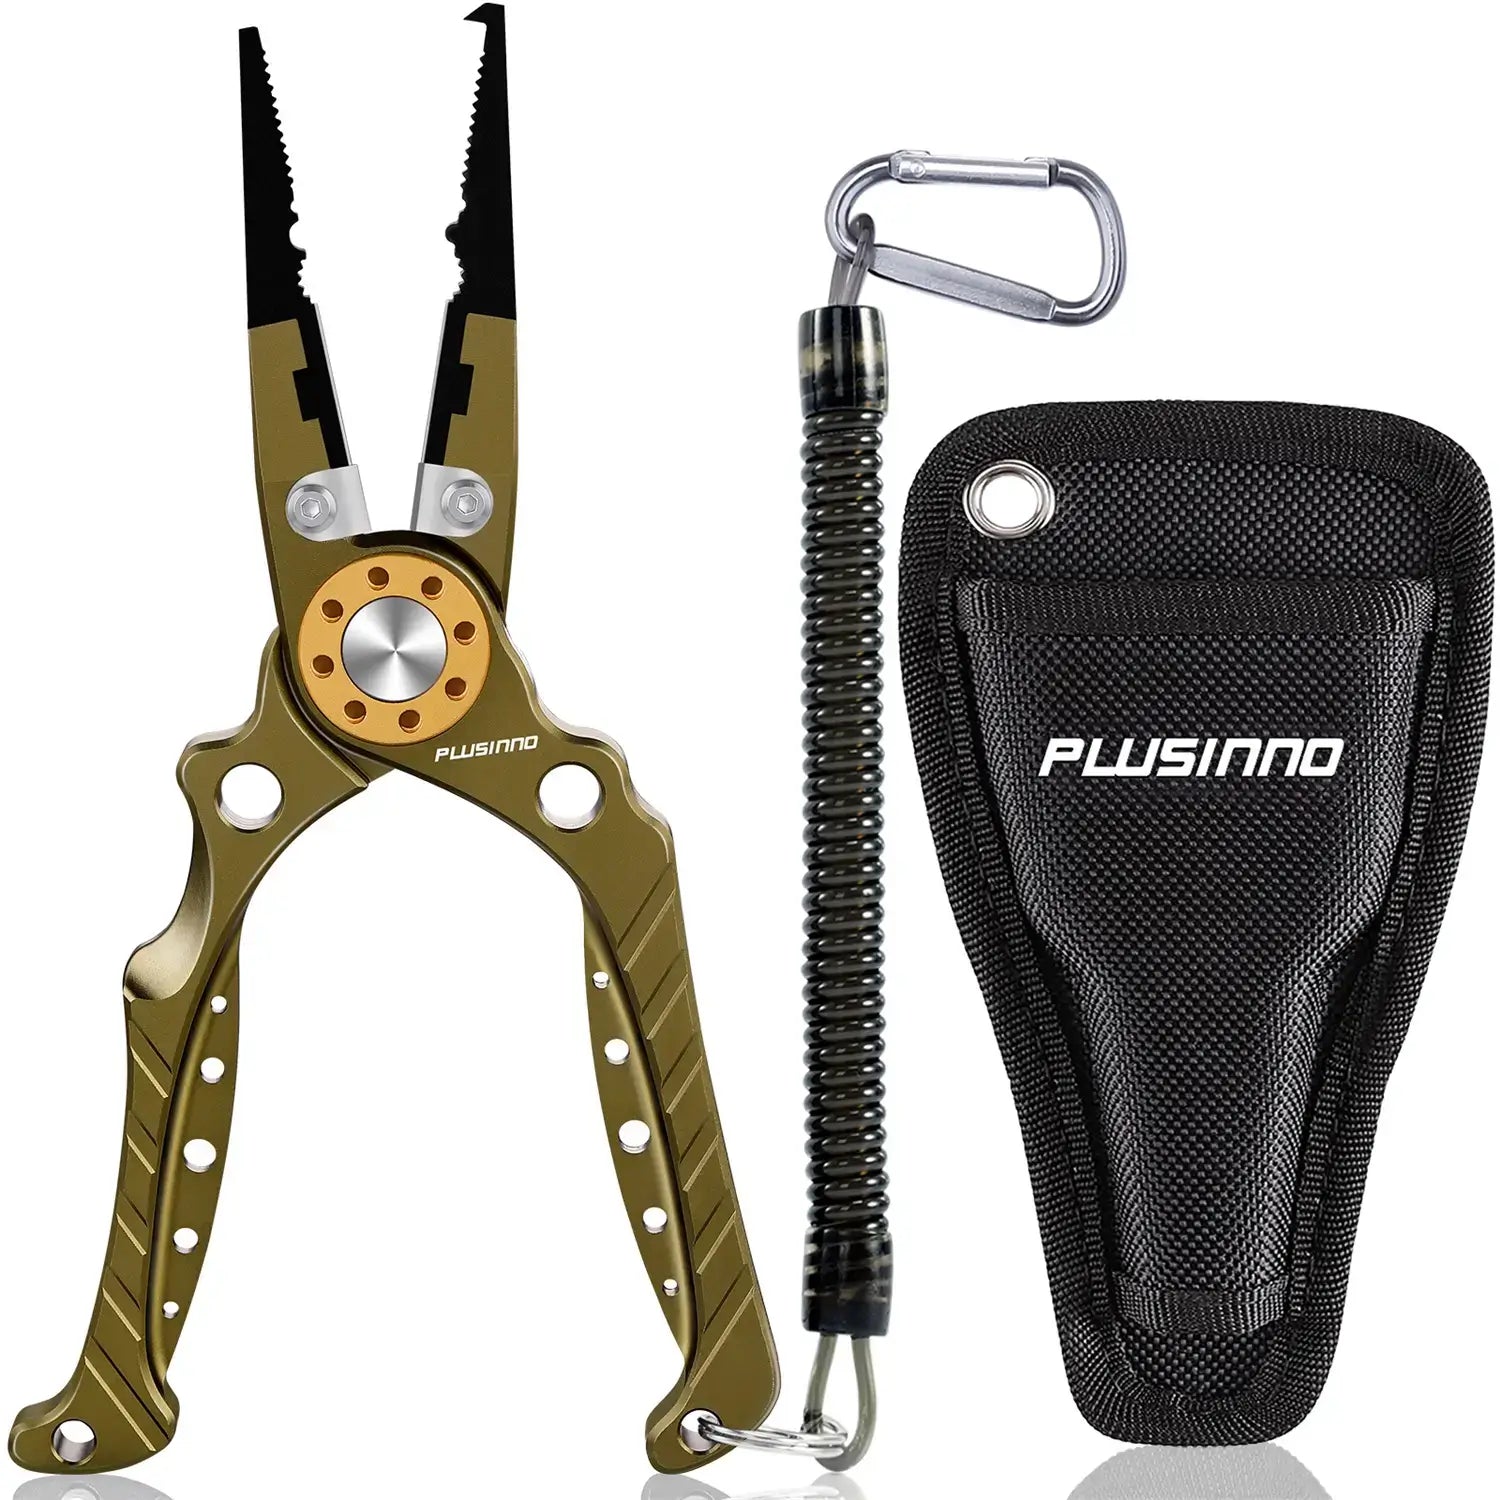 fishing pliers importer, fishing pliers importer Suppliers and